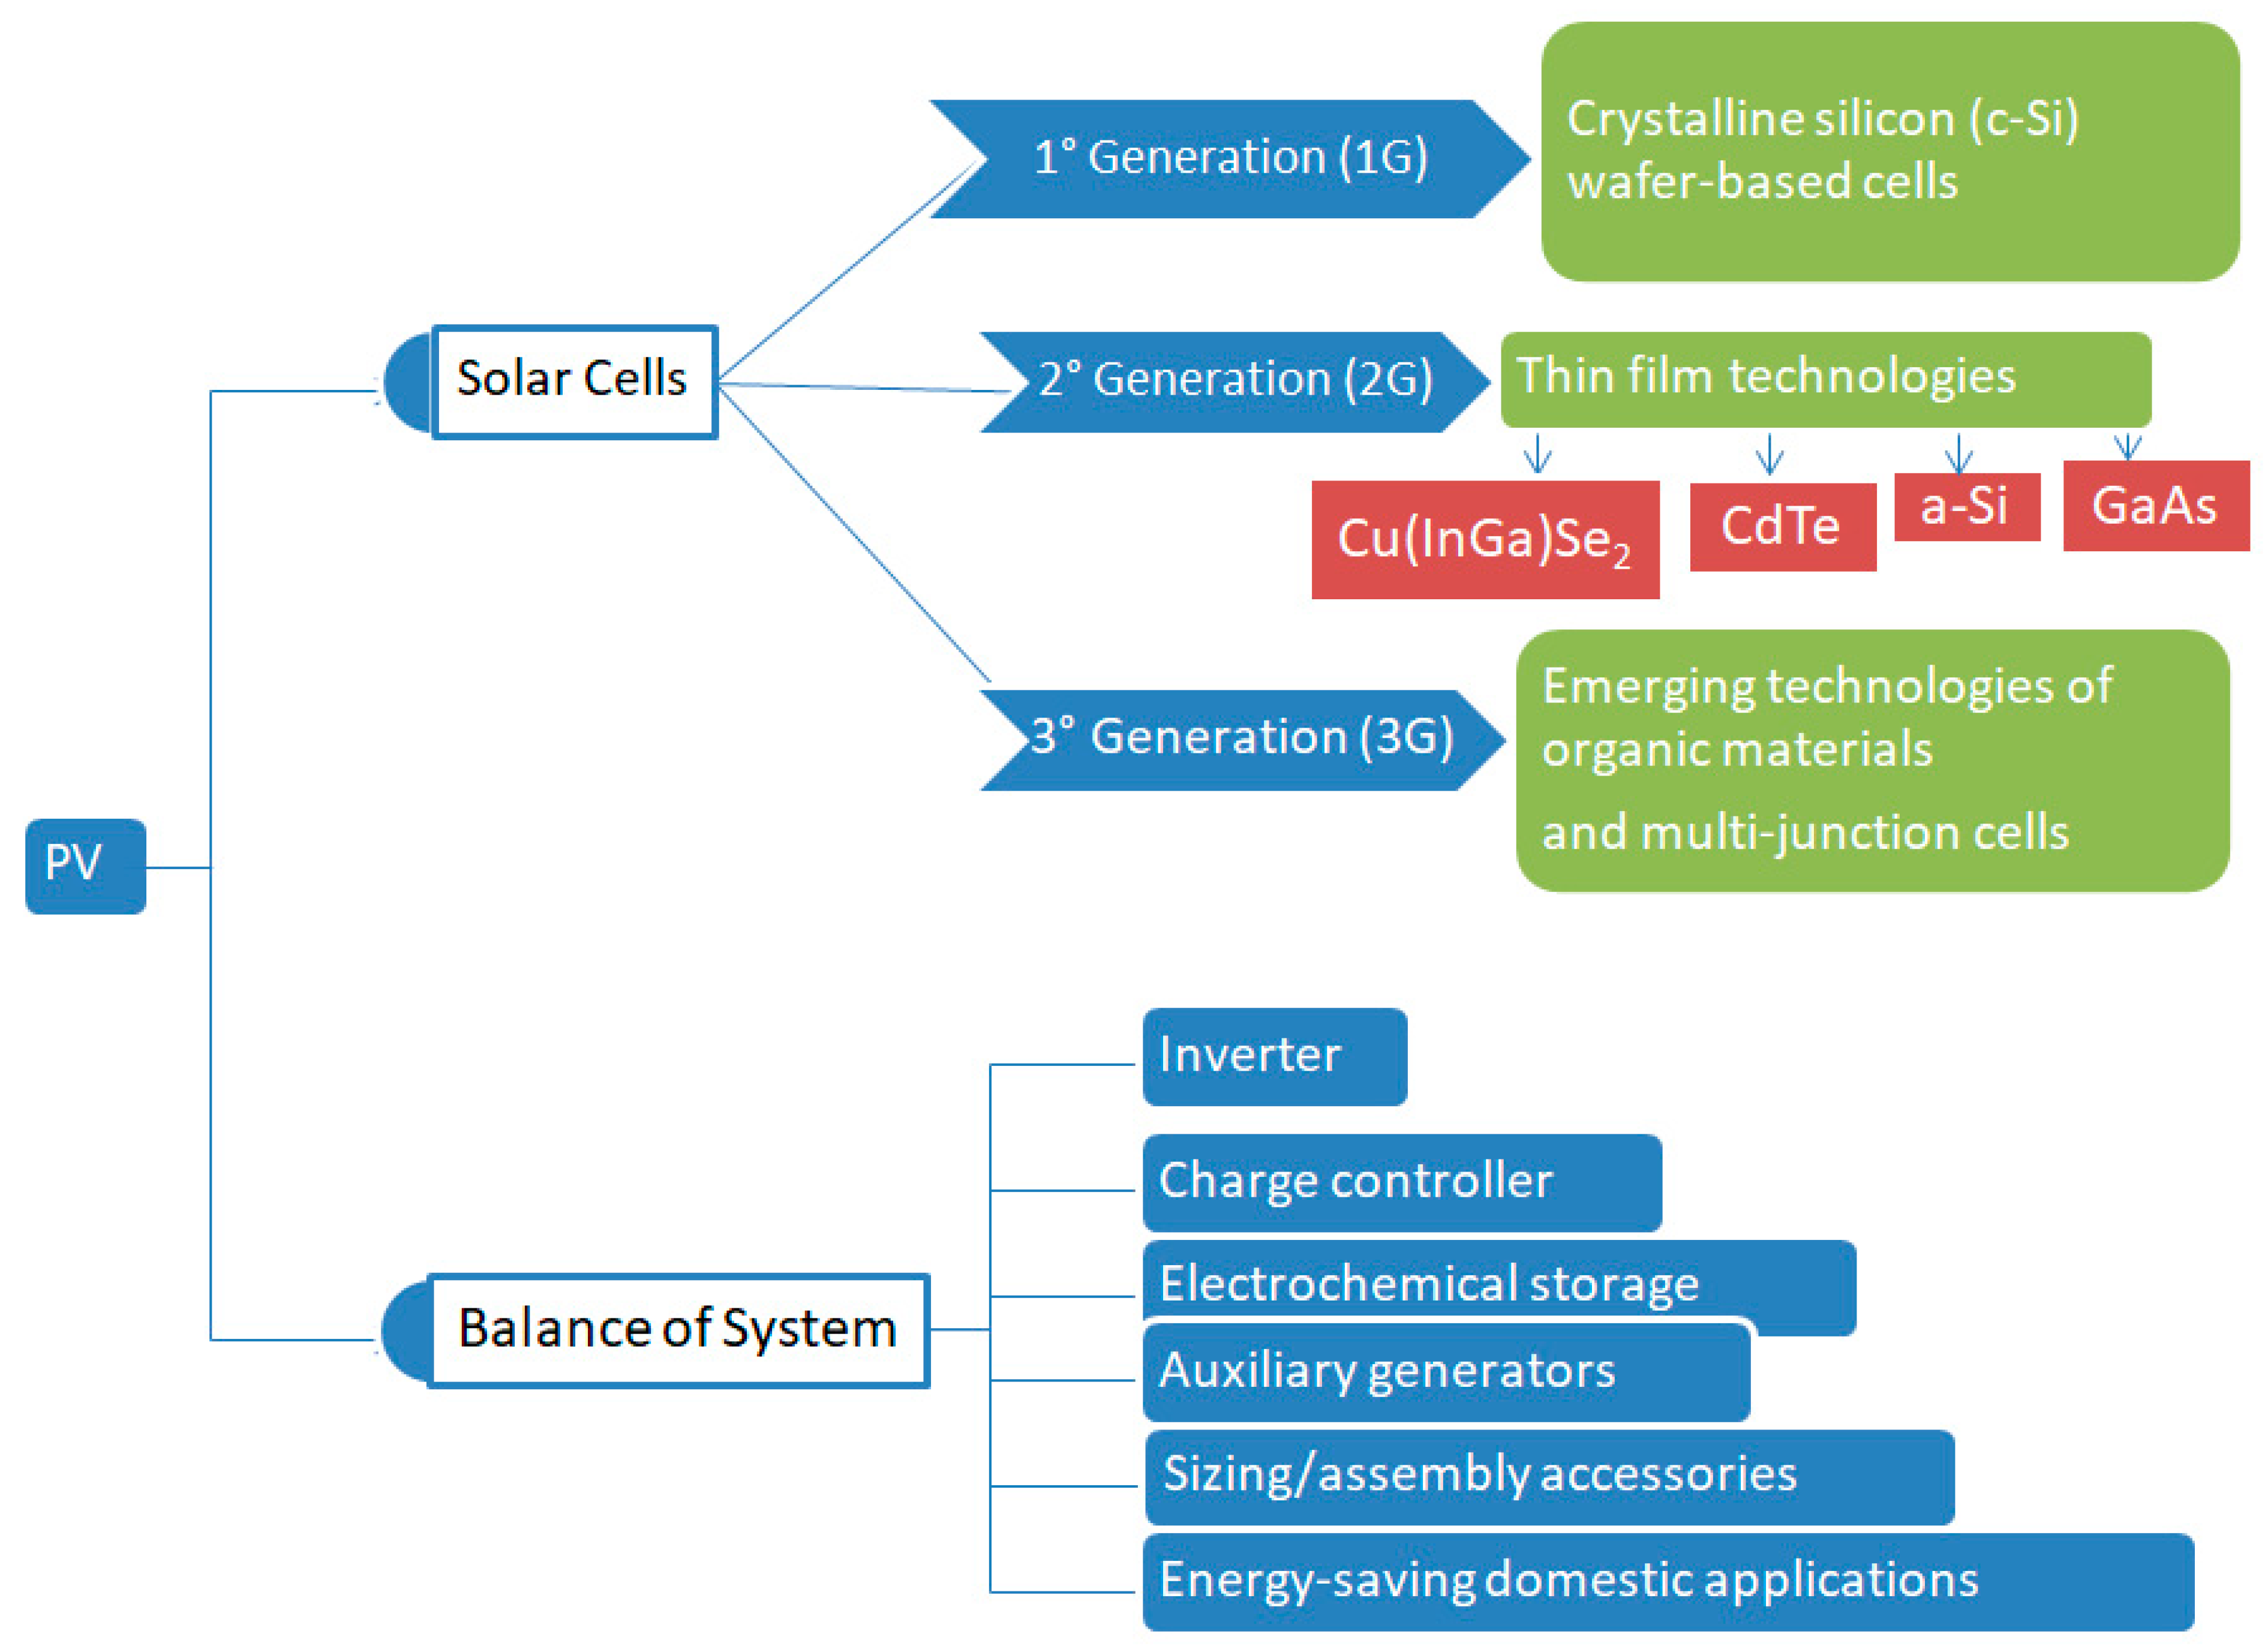 Energies Free Full Text Impacts Of Renewable Energy Resources On Effectiveness Of Grid Integrated Systems Succinct Review Of Current Challenges And Potential Solution Strategies Html